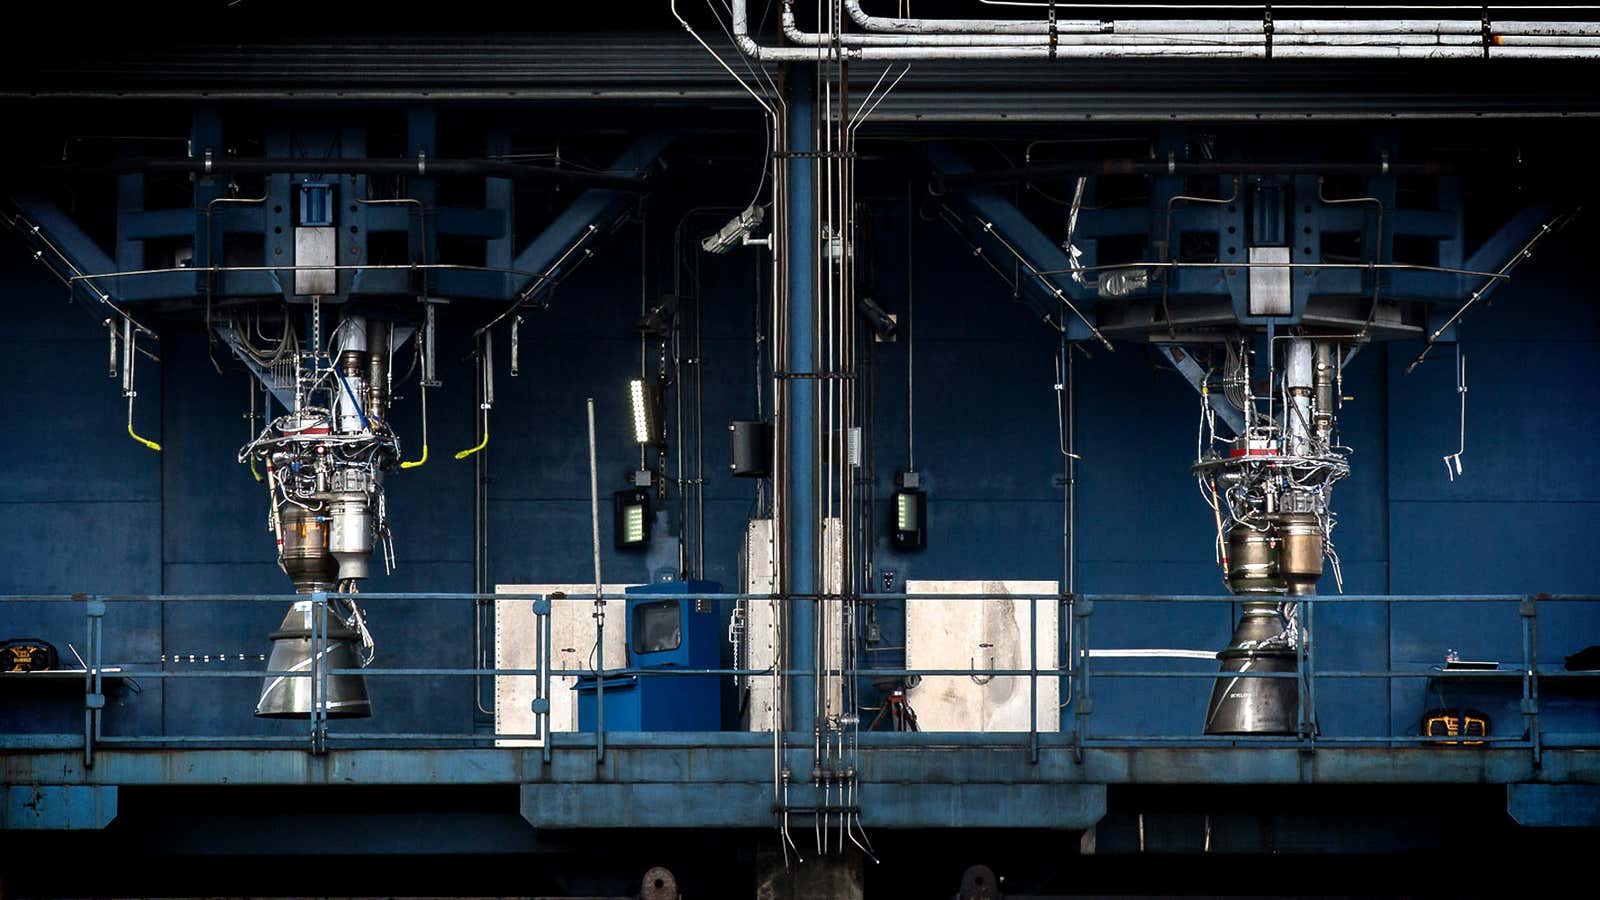 Simplifying rocket engines—like these two built by SpaceX—is never easy.